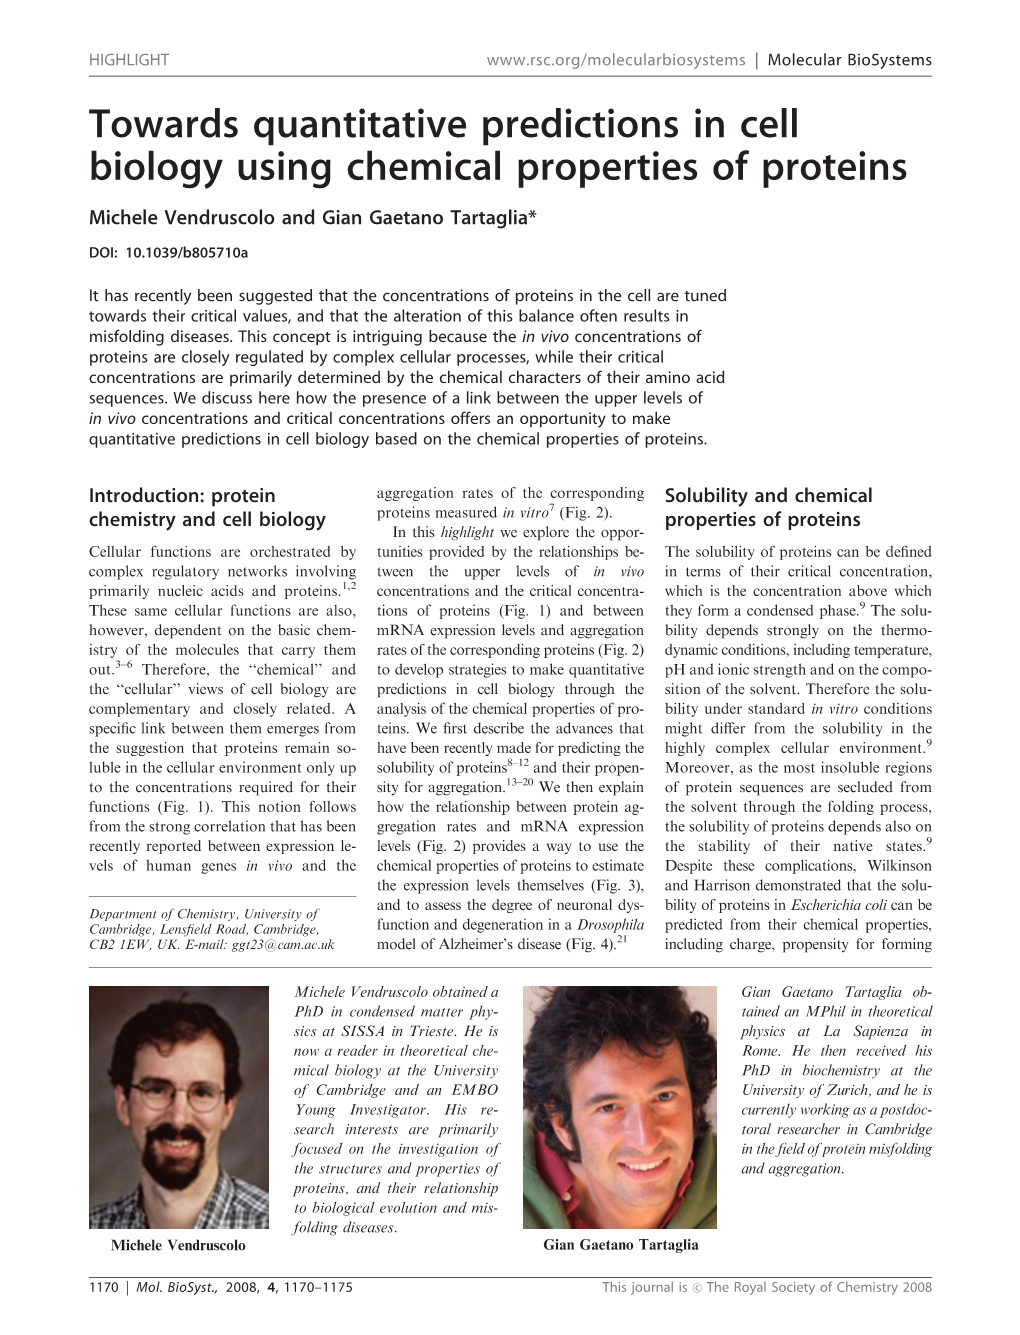 Towards Quantitative Predictions in Cell Biology Using Chemical Properties of Proteins Michele Vendruscolo and Gian Gaetano Tartaglia*